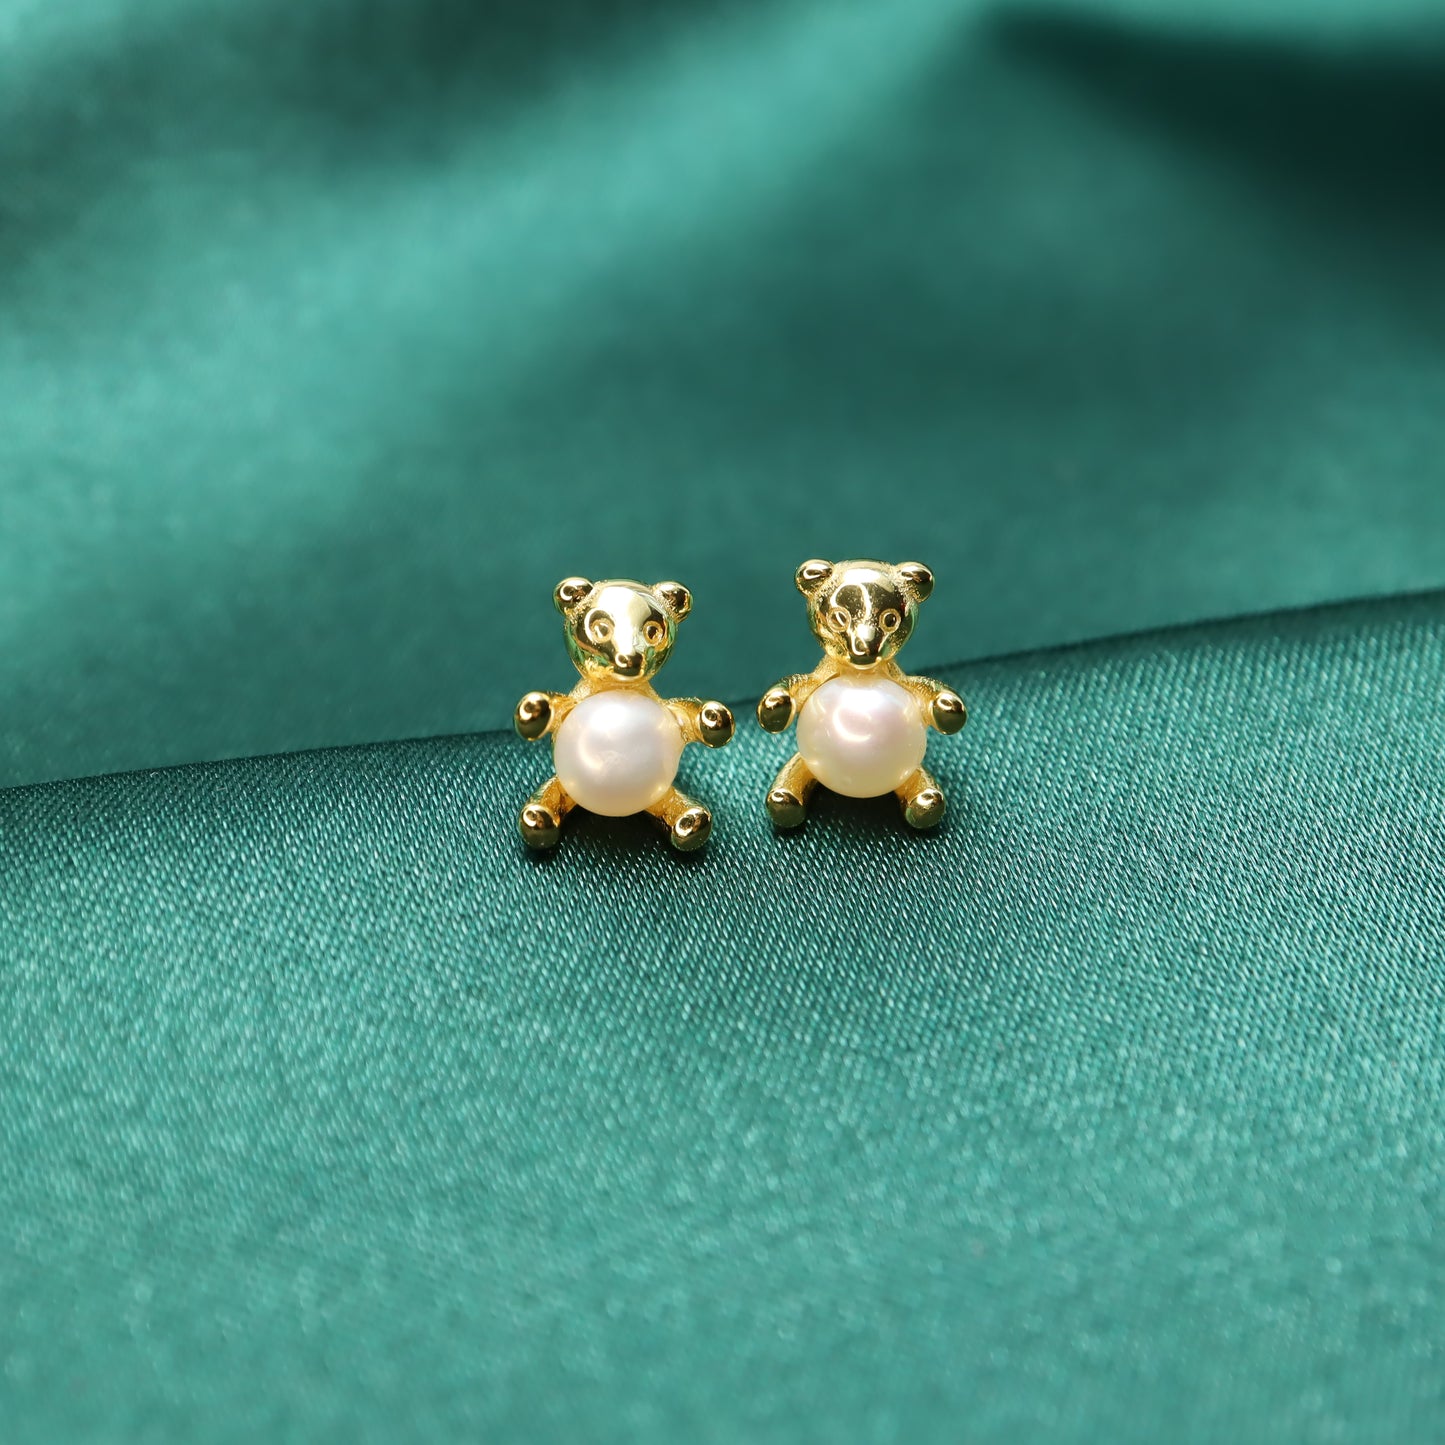 Teddy Bear S925 Sterling Silver Gold Plated with Faux Pearl Stud Earrings (Color: Gold)